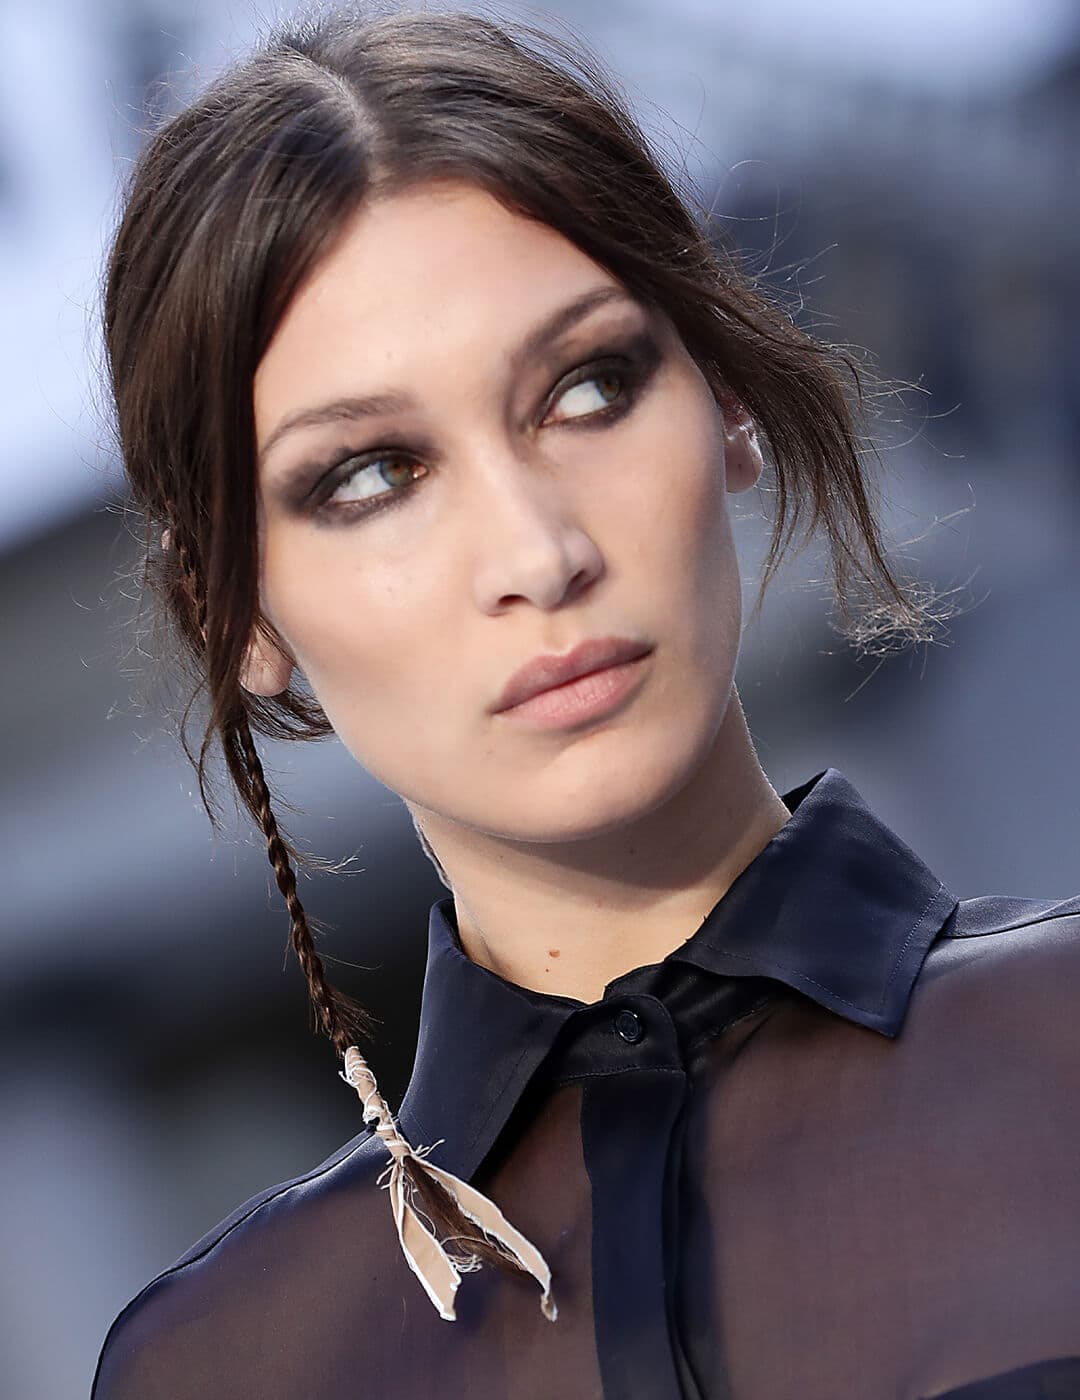 Bella Hadid rocking a micro accent braid hairstyle with ribbons at the end